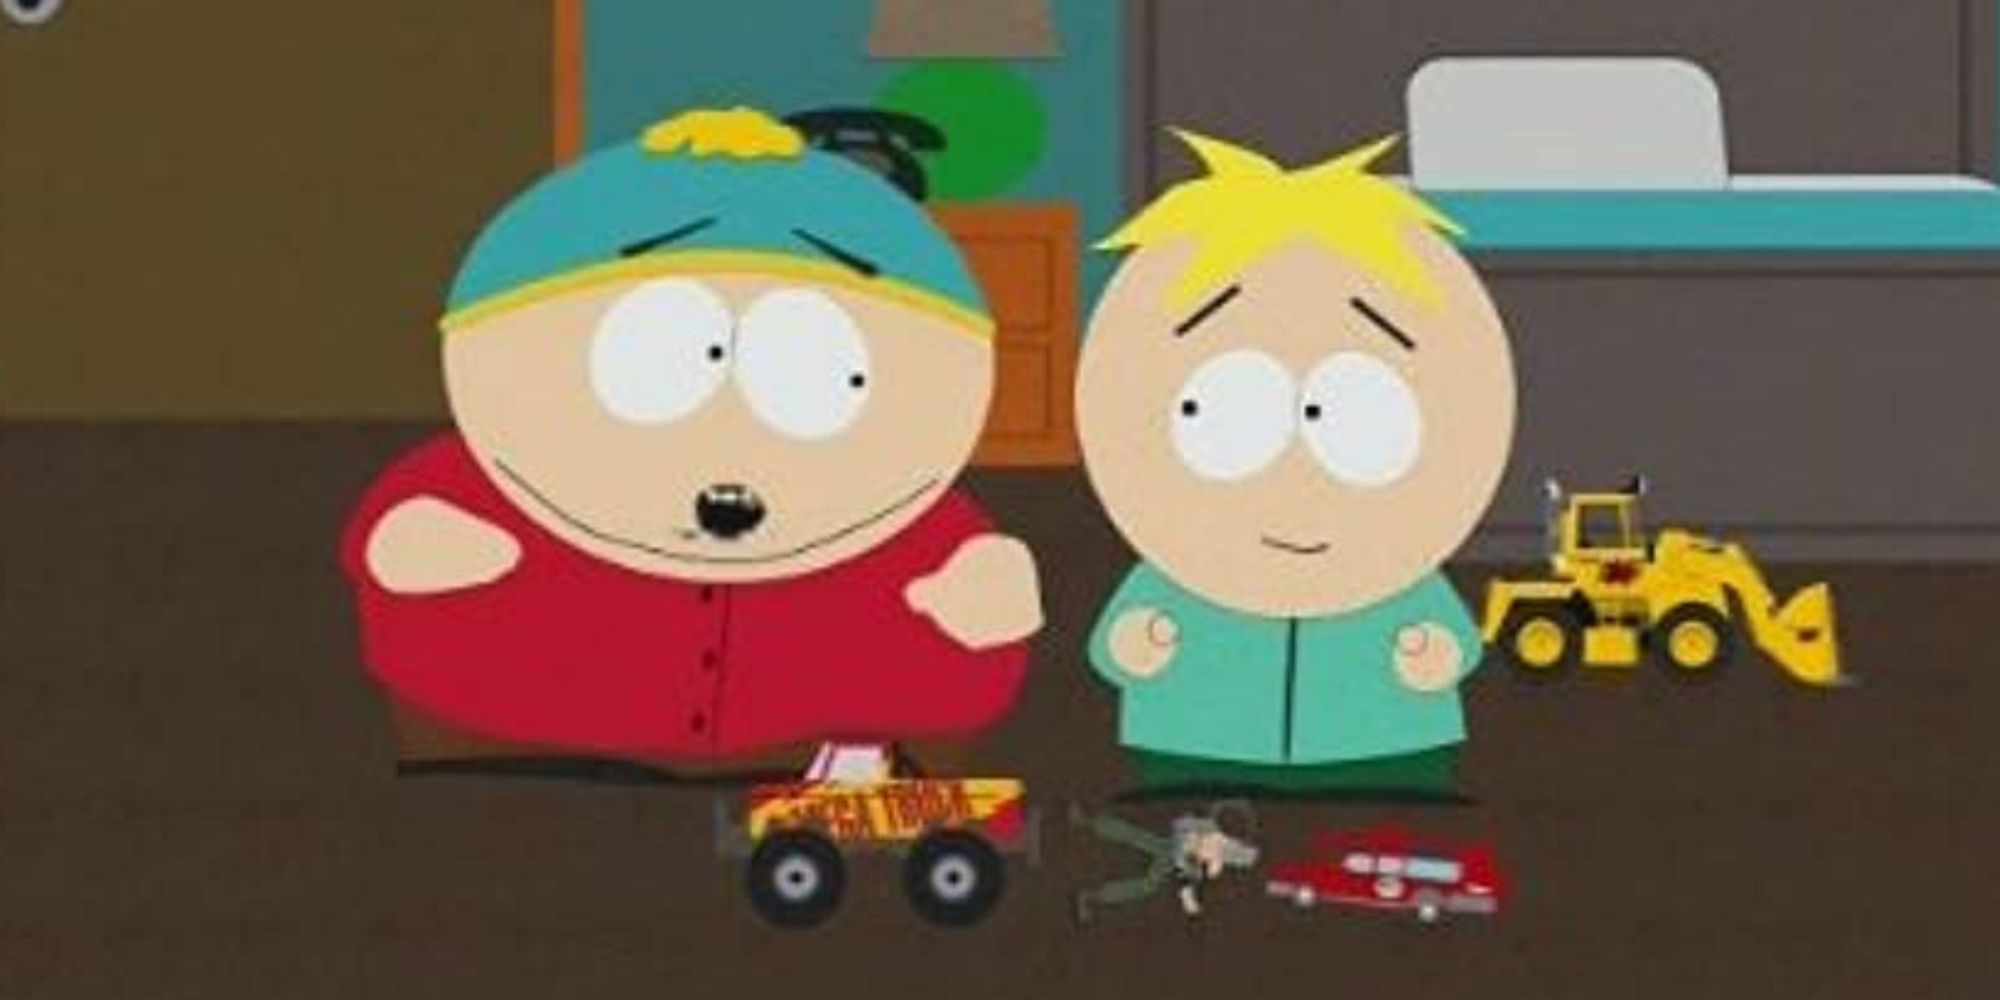 Cartman Sucks South Park Butters and Cartman in his room